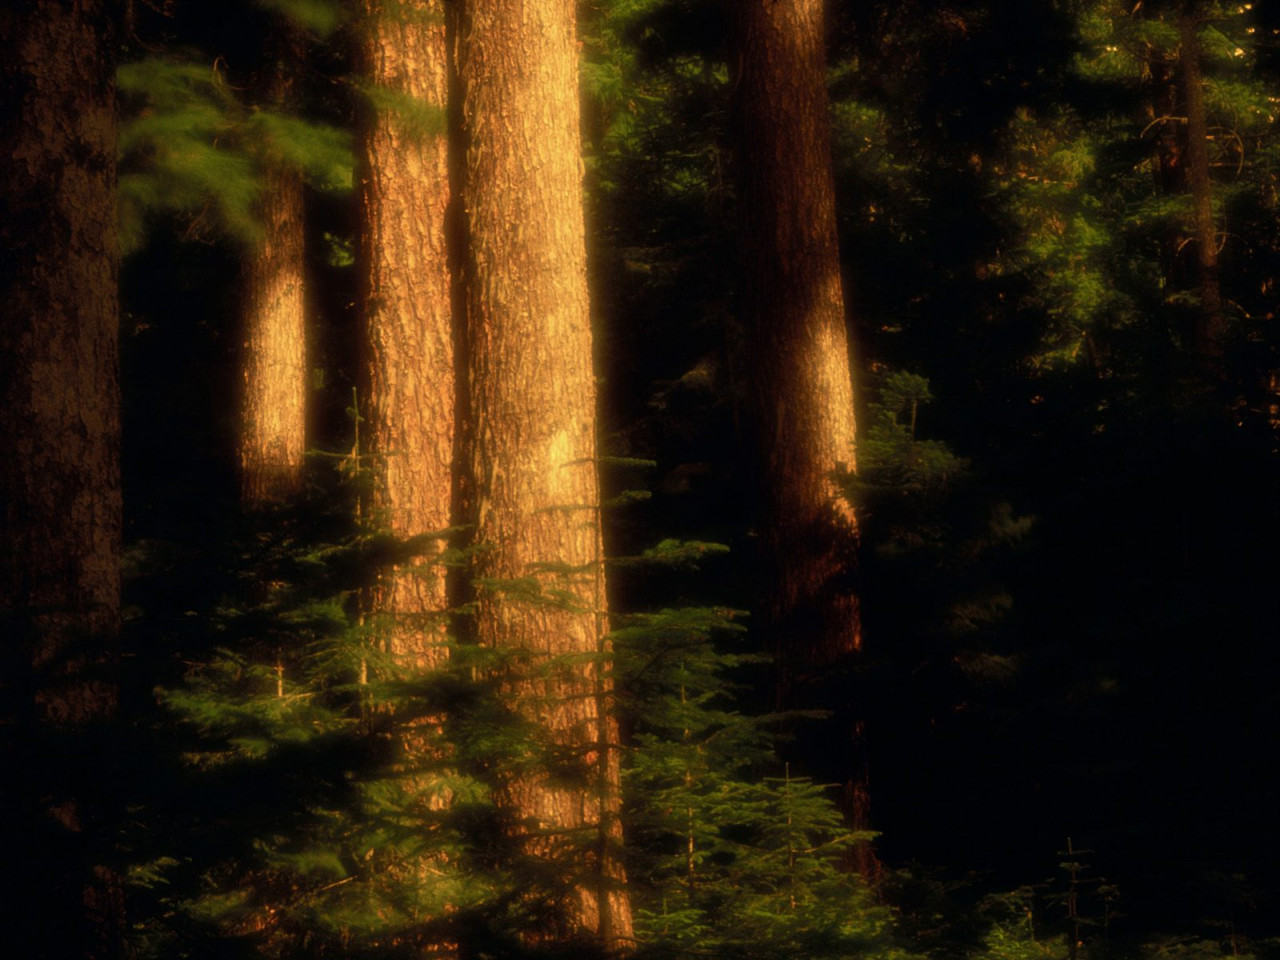 Tapeta Old Growth Forest, Hood River County, Oregon.jpg